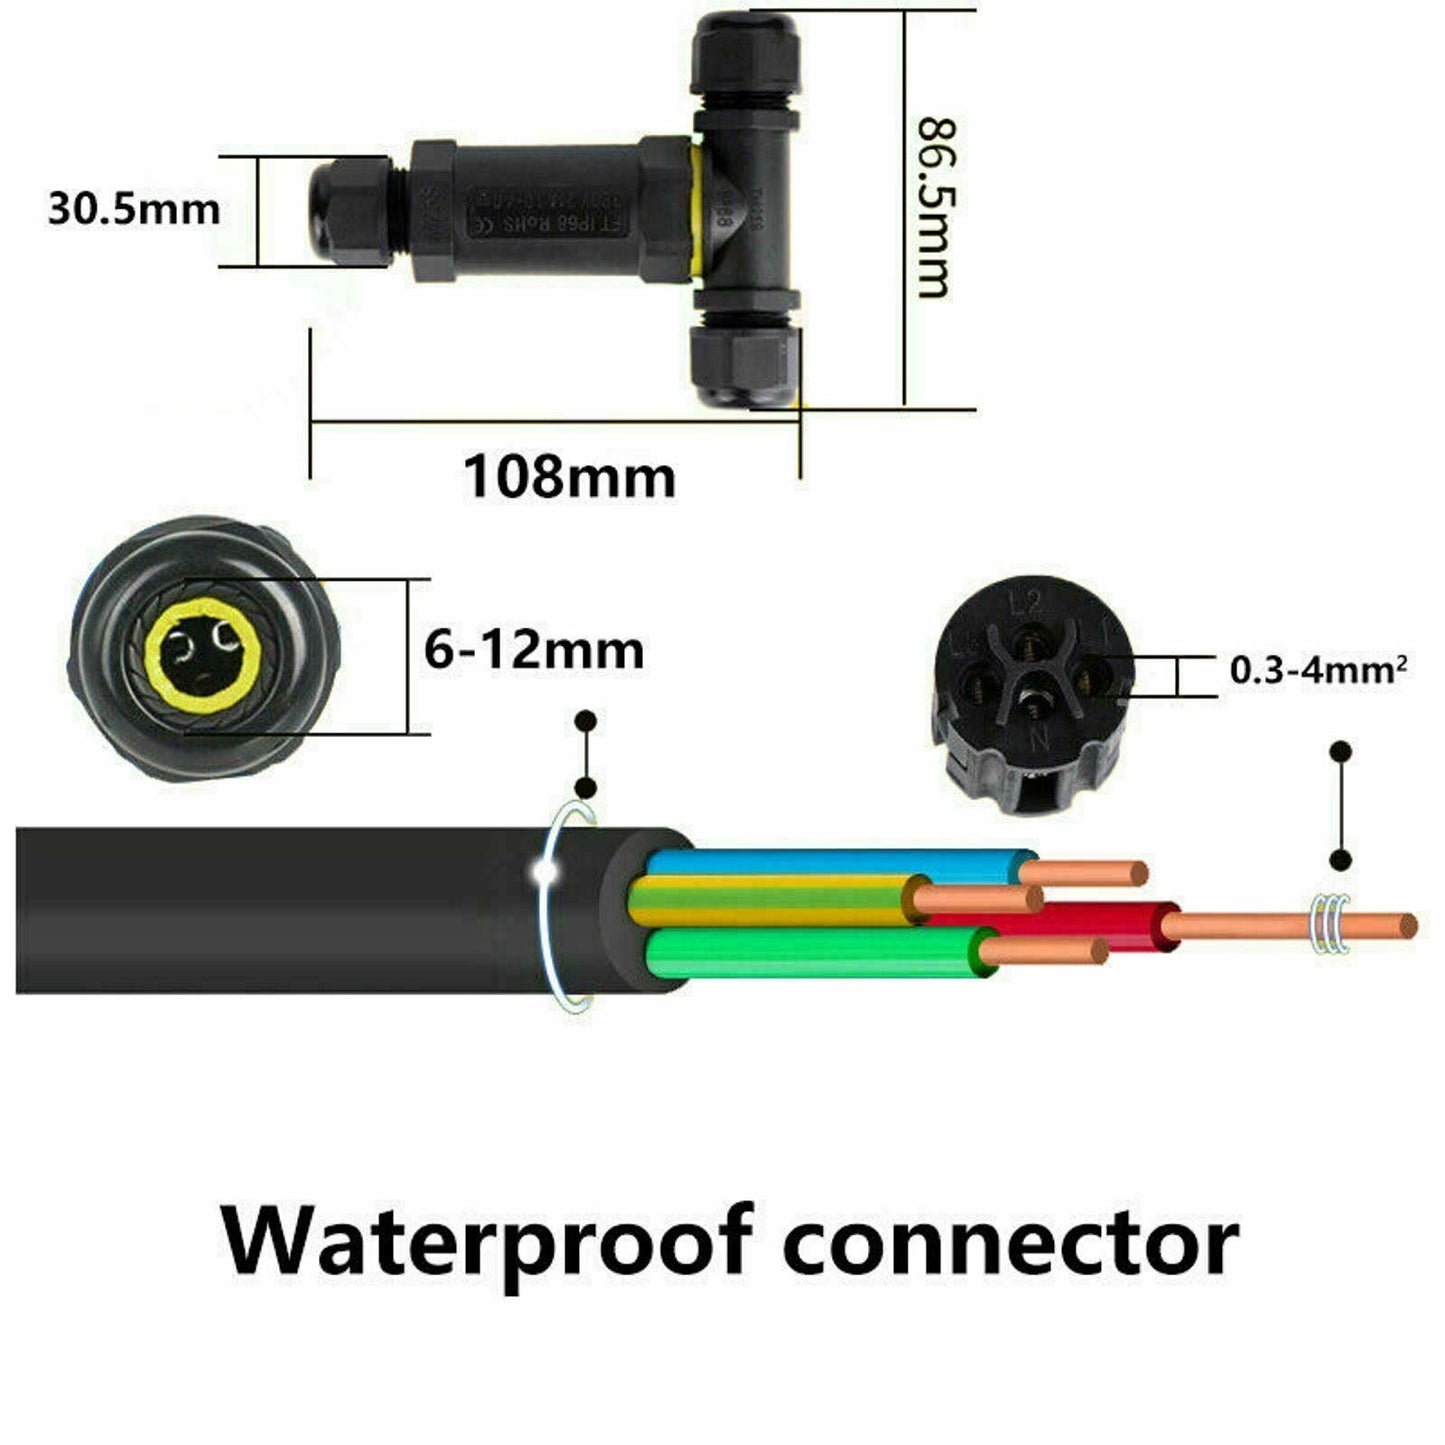 LongLife Waterproof Electrical Junction Box Cable Connector Wire IP68 Outdoor UK~3556 - LEDSone UK Ltd